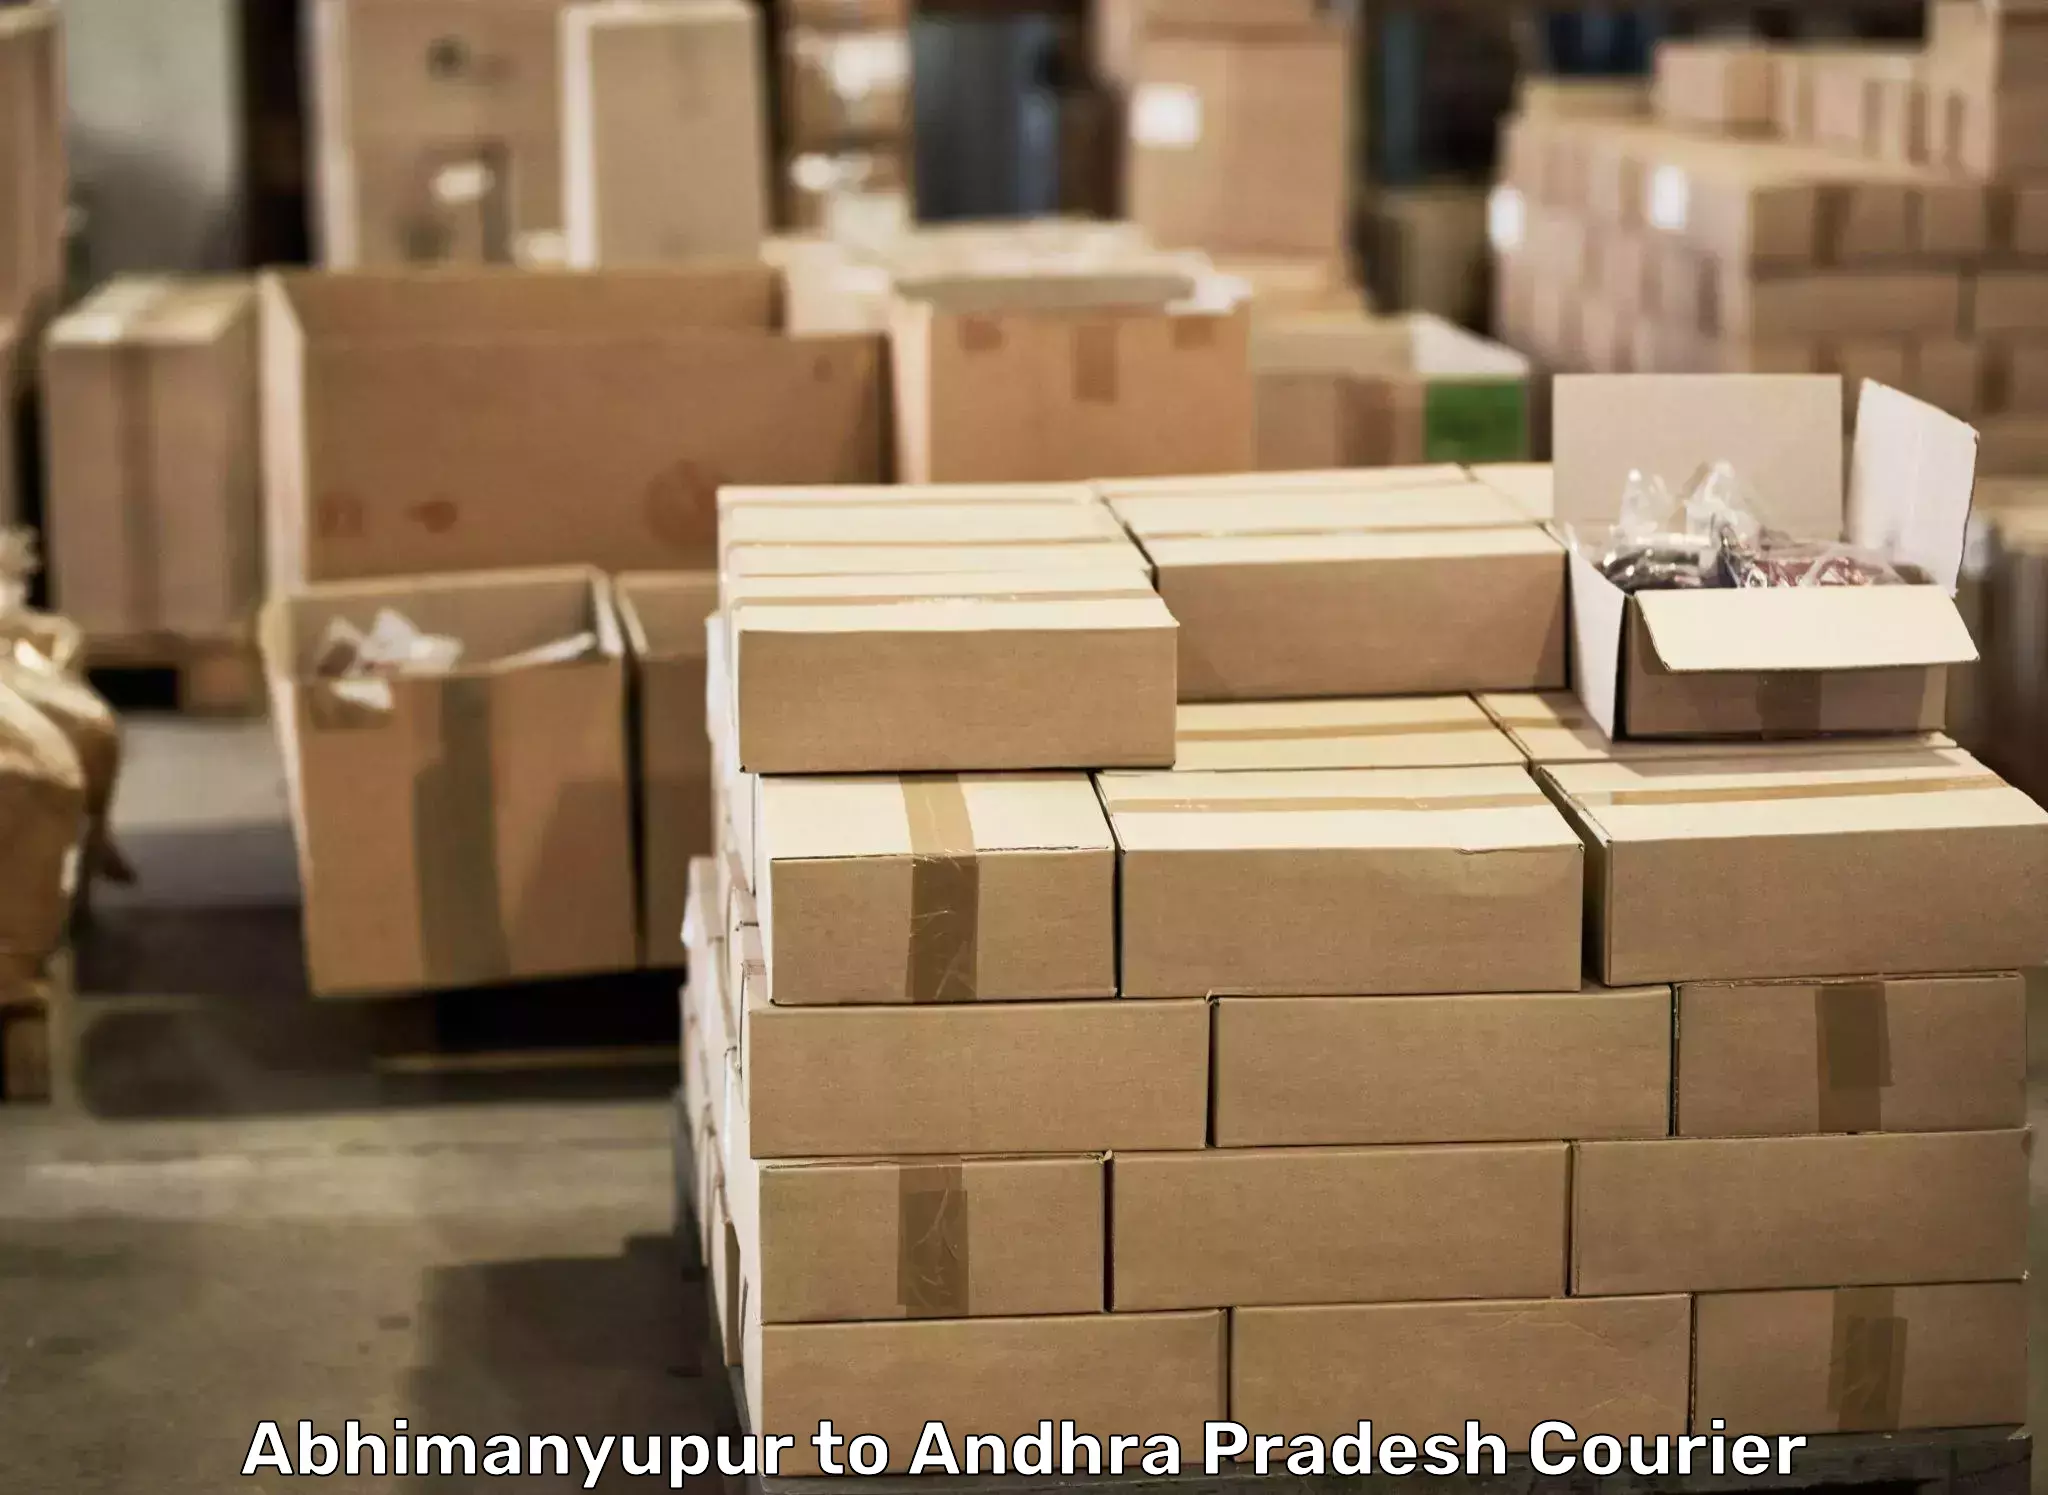 Home goods moving company Abhimanyupur to Chilakaluripet